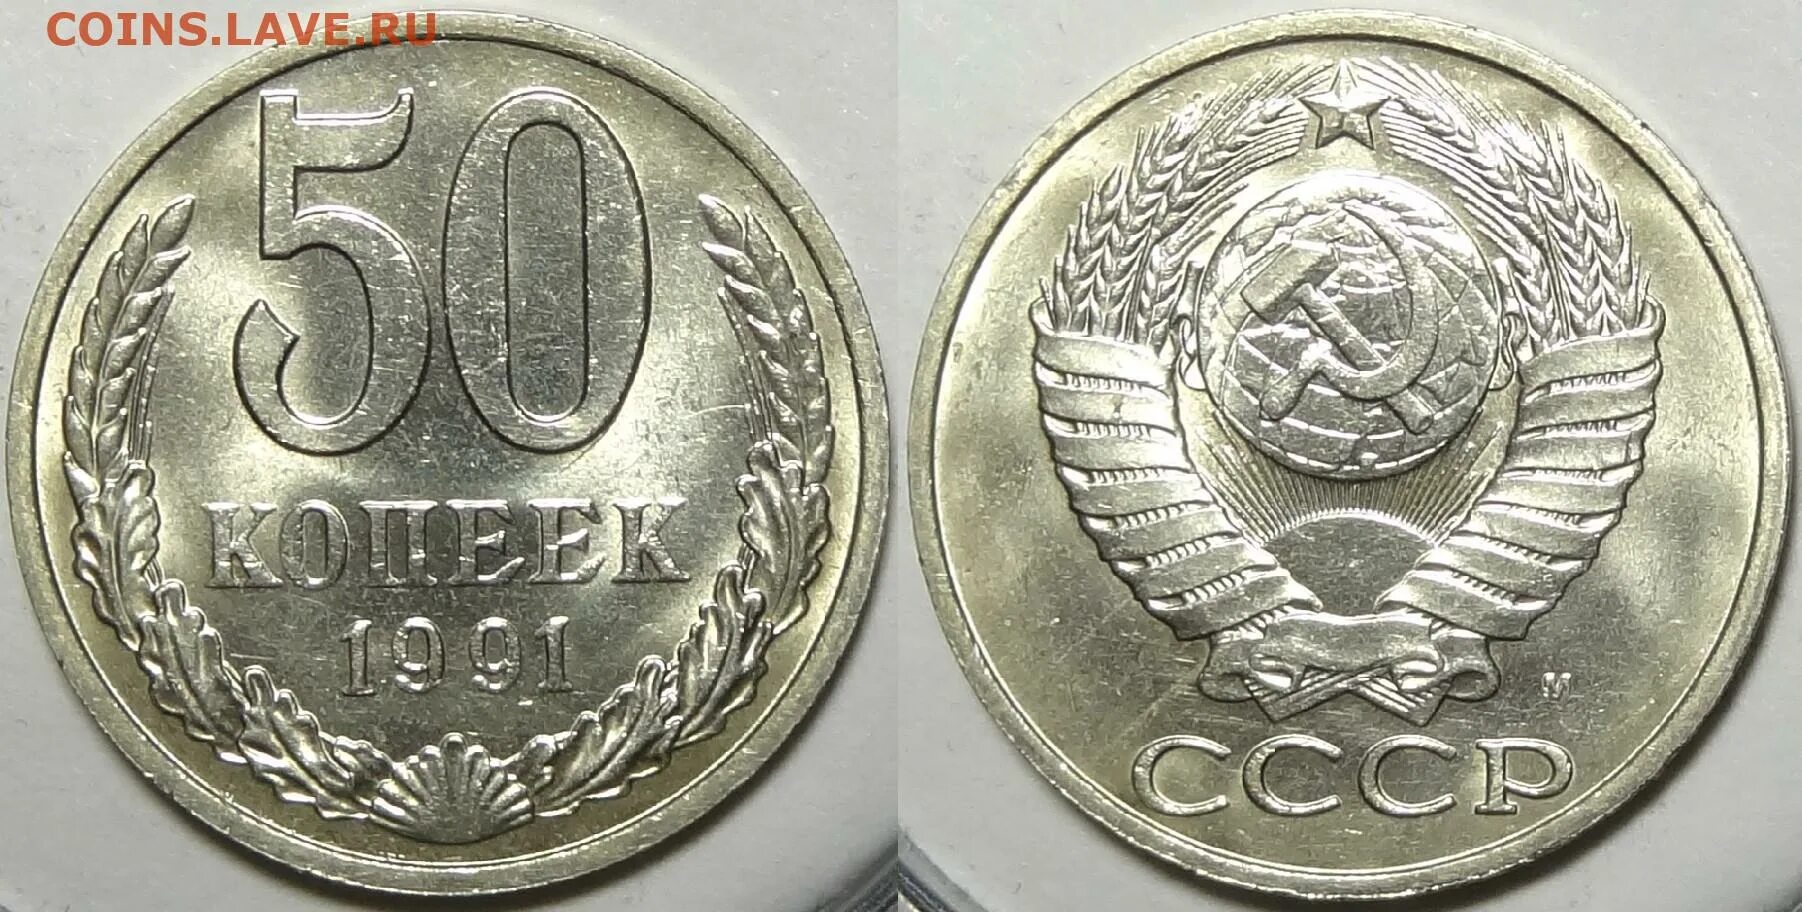 50 Копеек 1991. 5 Копеек 1984. 2 Копейки 1984. 3 Копейки 1991 м. 20 50 рф